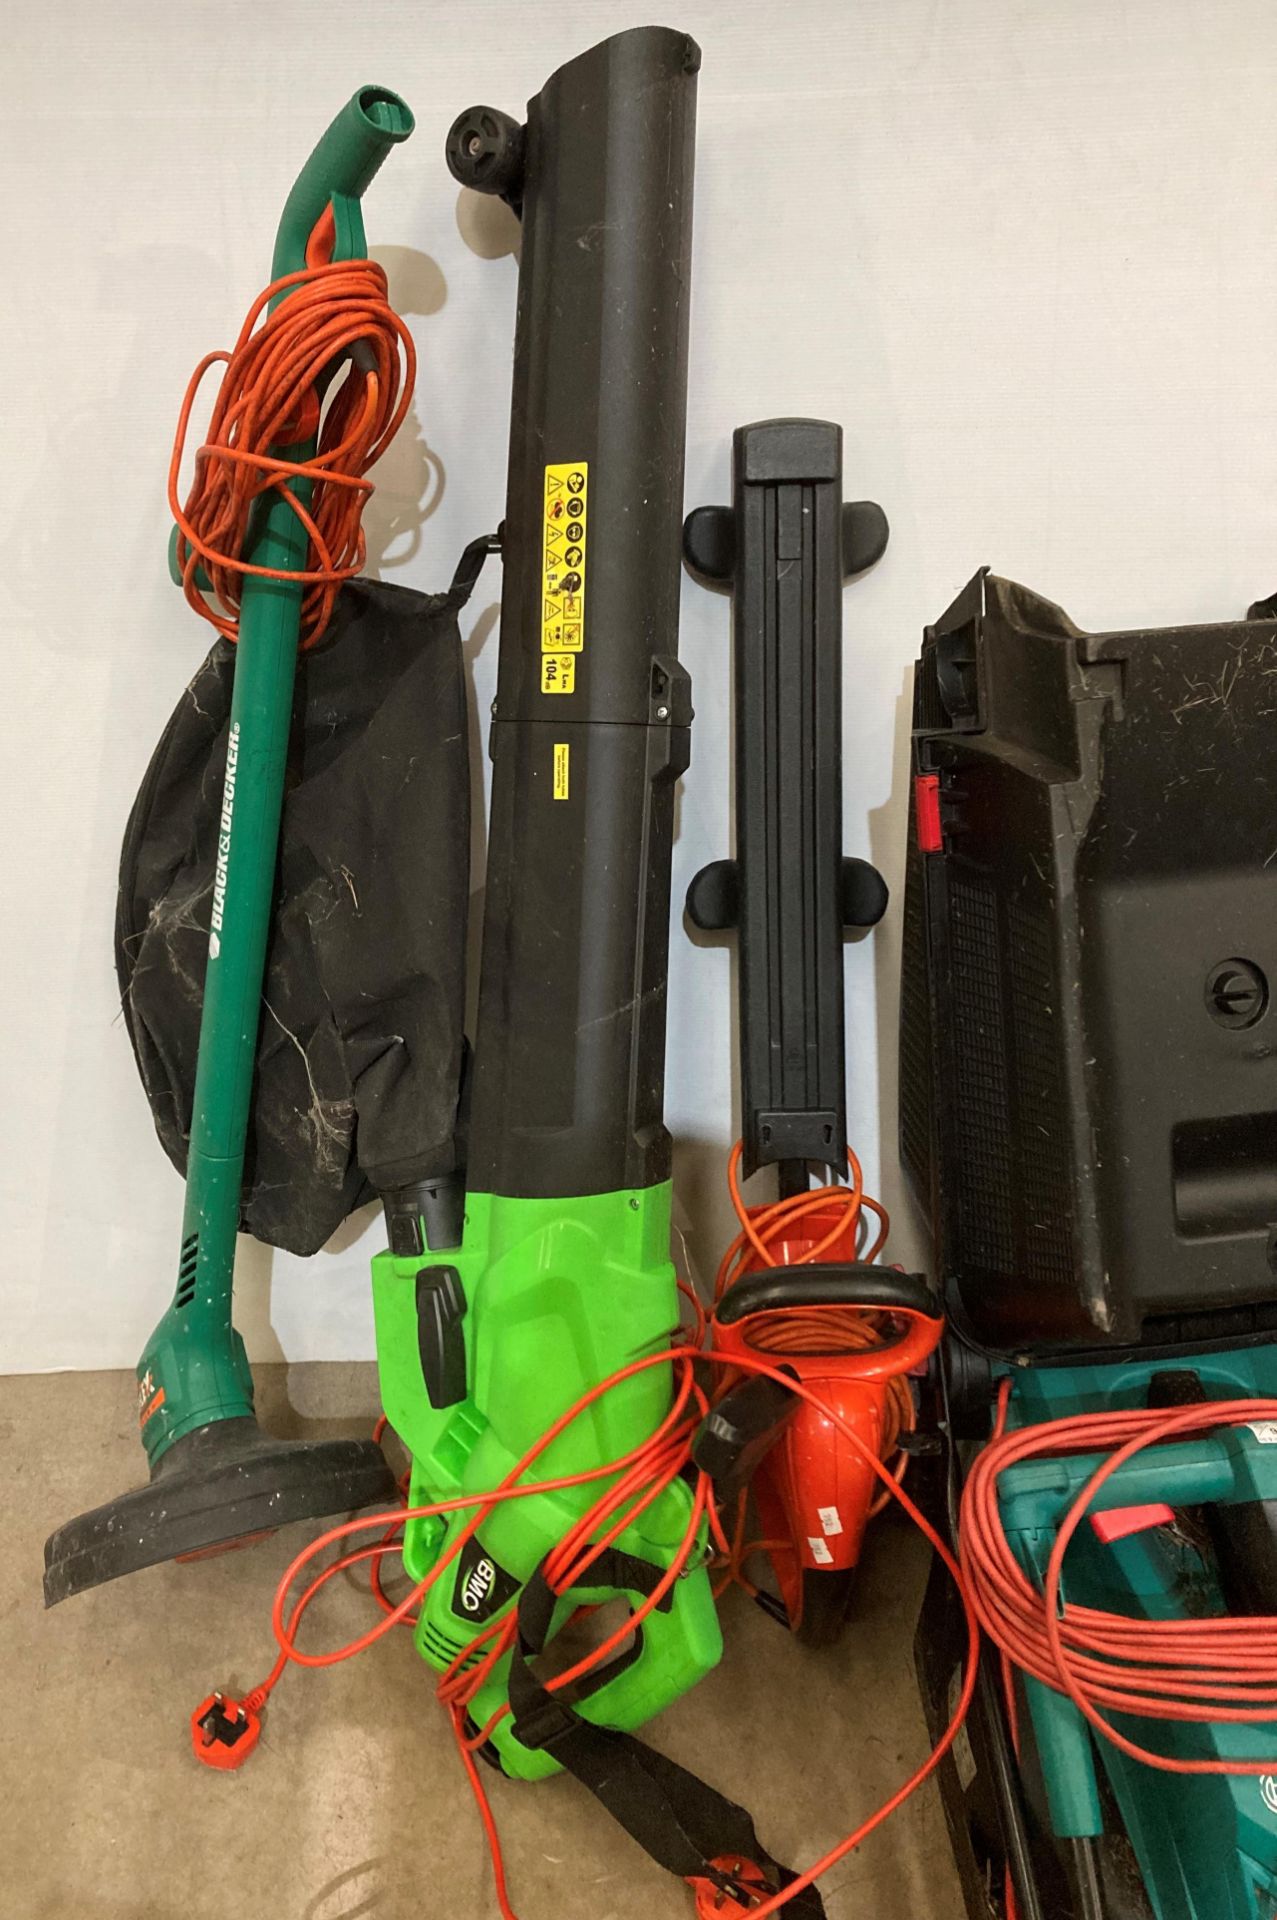 Four assorted electrical garden tools including - Bosch Rotak 540ER lawn mower with back box, - Image 2 of 2